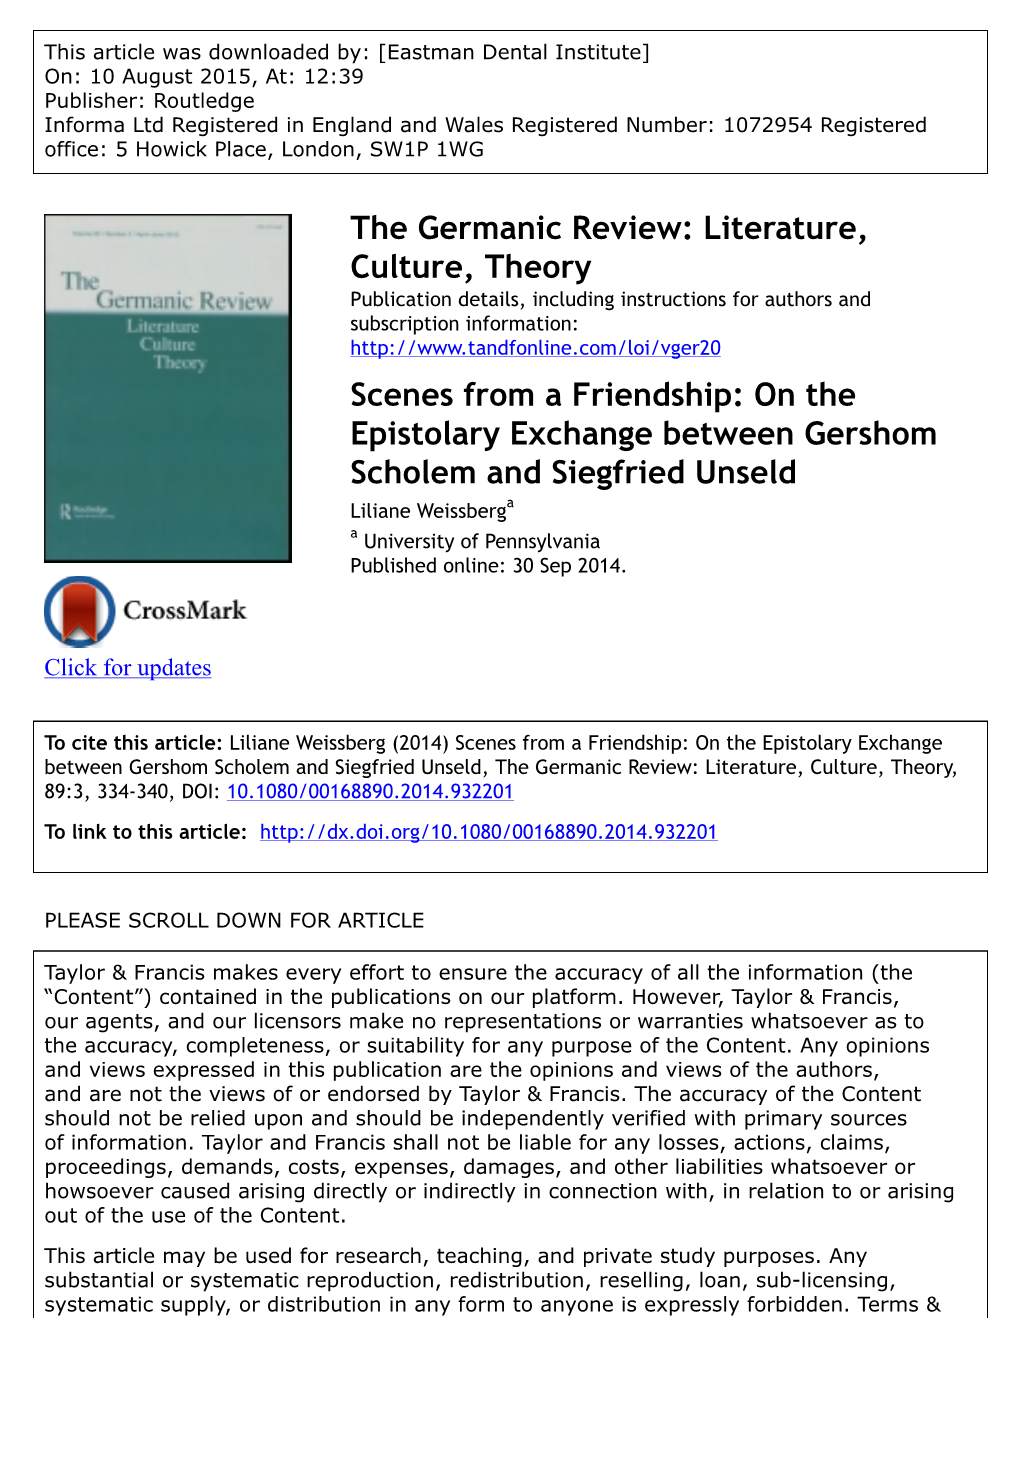 On the Epistolary Exchange Between Gershom Scholem and Siegfried Unseld Liliane Weissberga a University of Pennsylvania Published Online: 30 Sep 2014